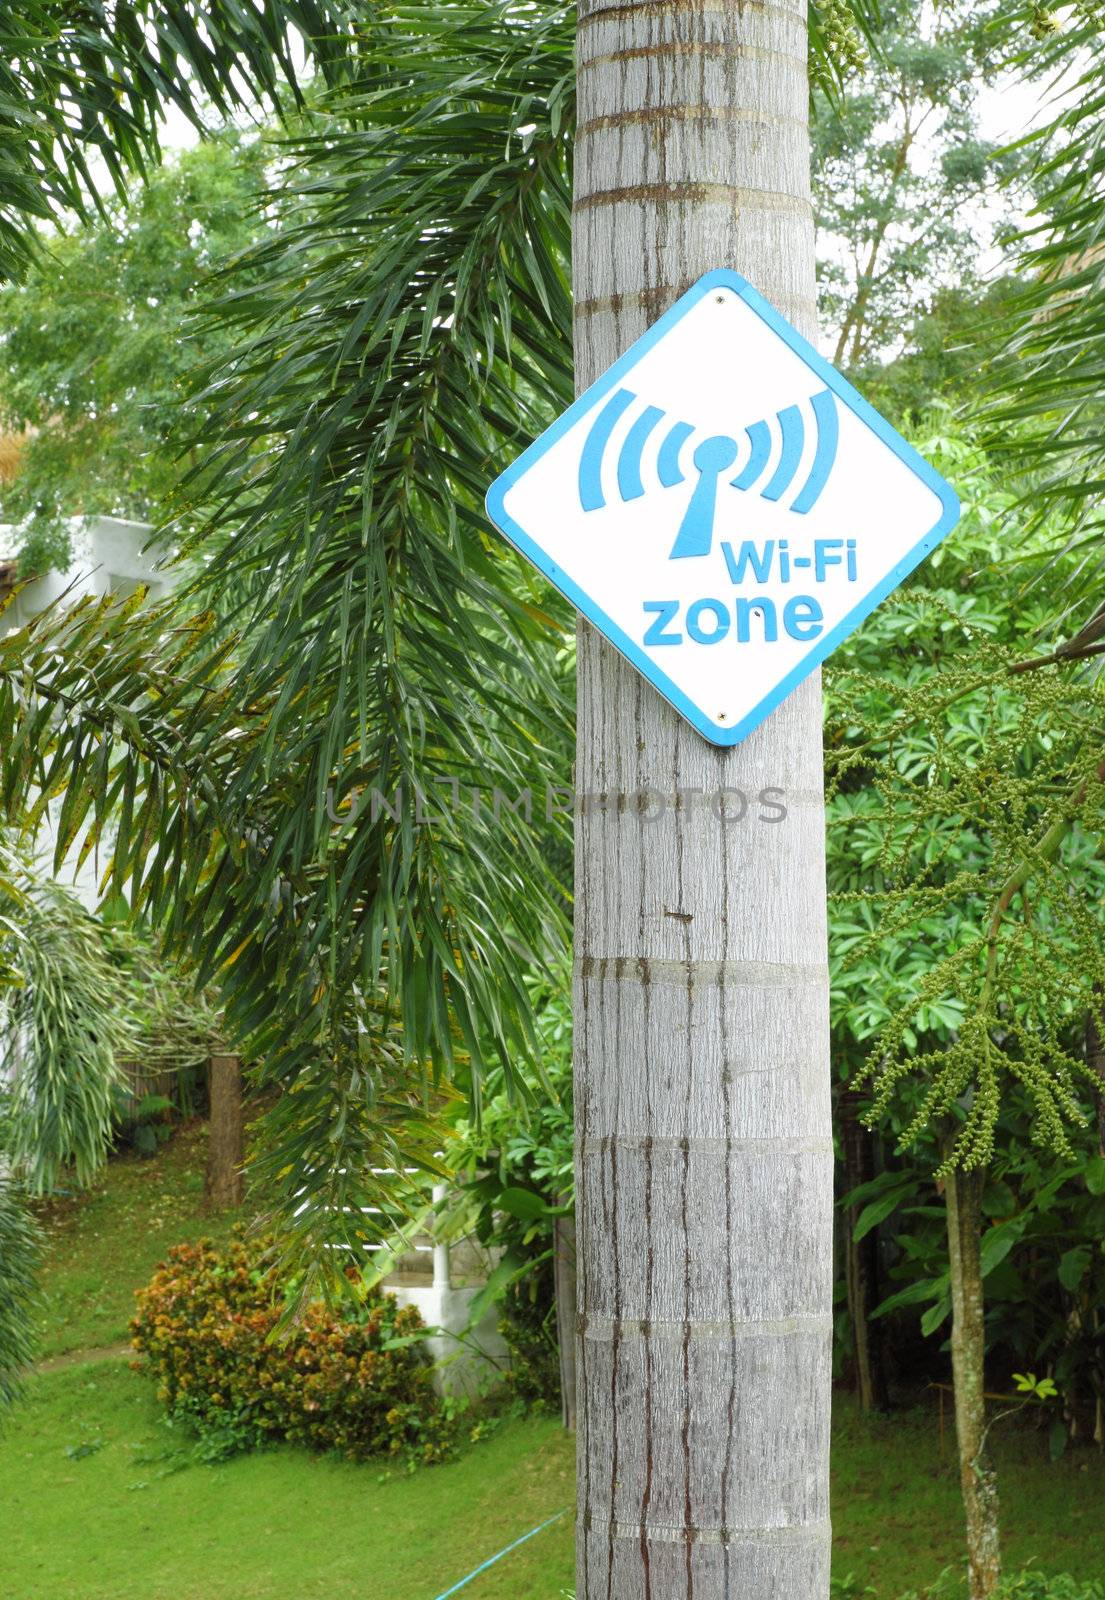 Wi-Fi zone sign on tree in the garden